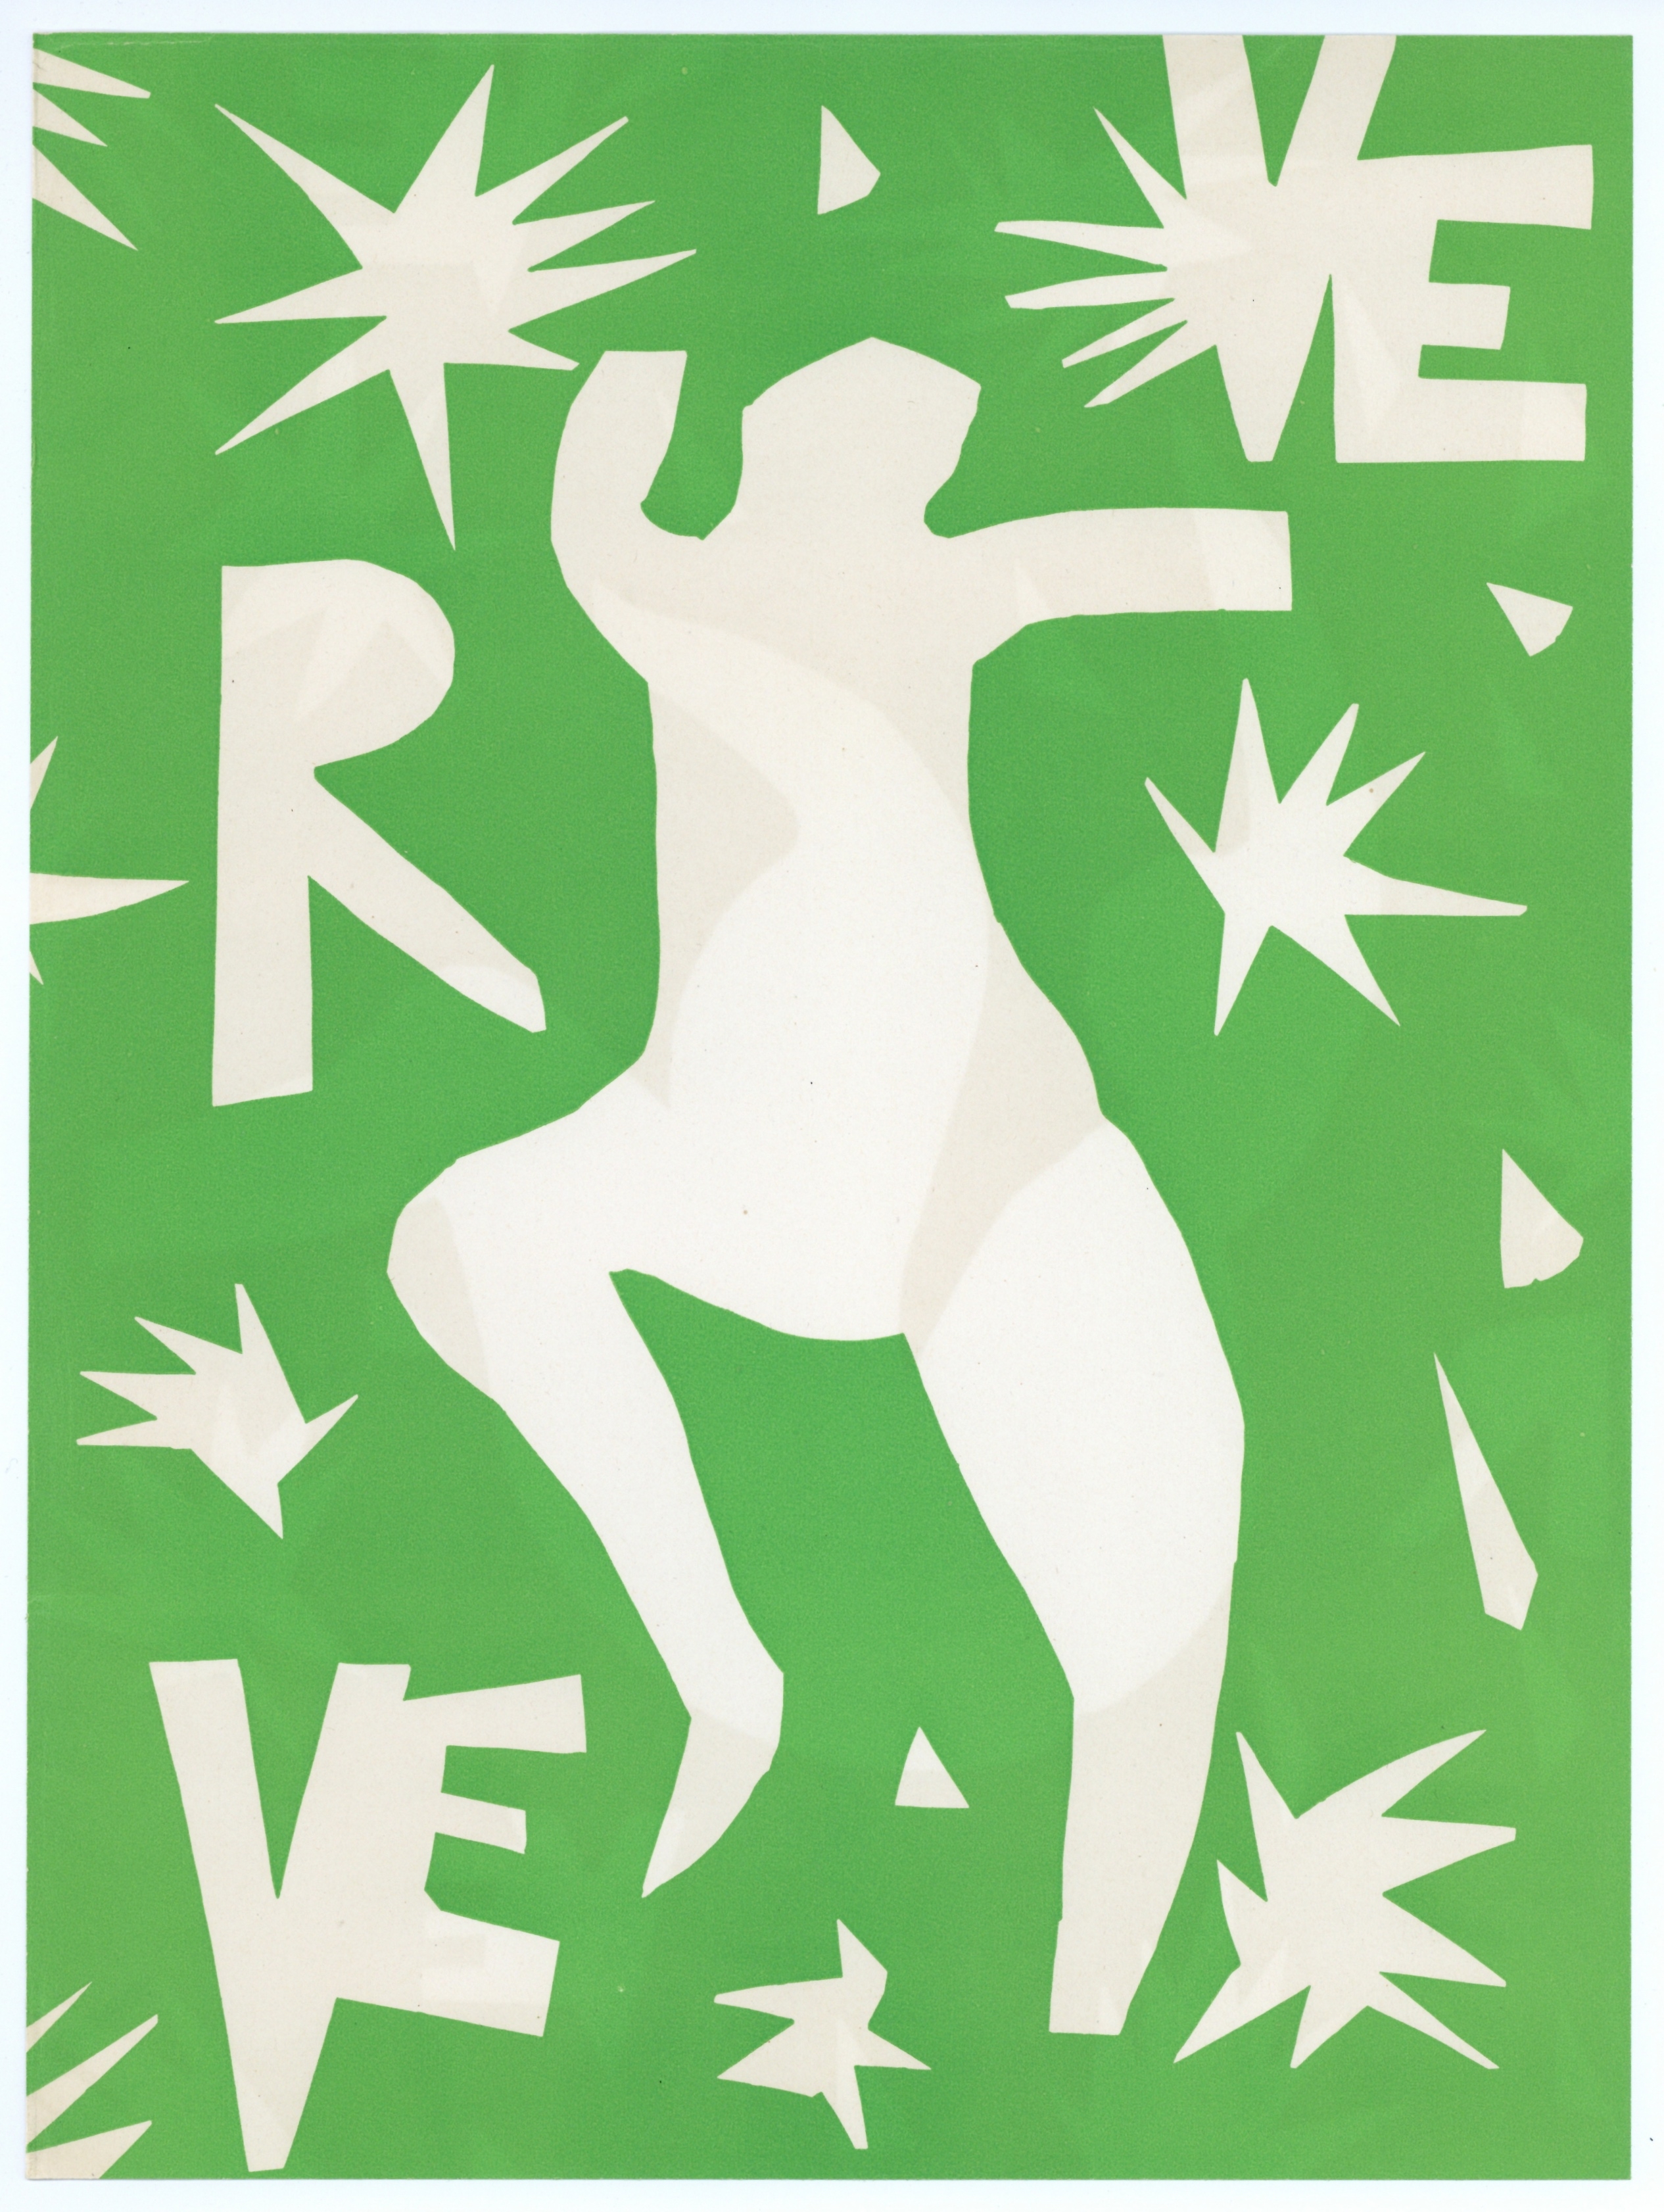 A cover of VERVE magazine, which comprises cut-outs of a figure dancing, surrounded by stars and the letters of the magazine title, against a bright green background.